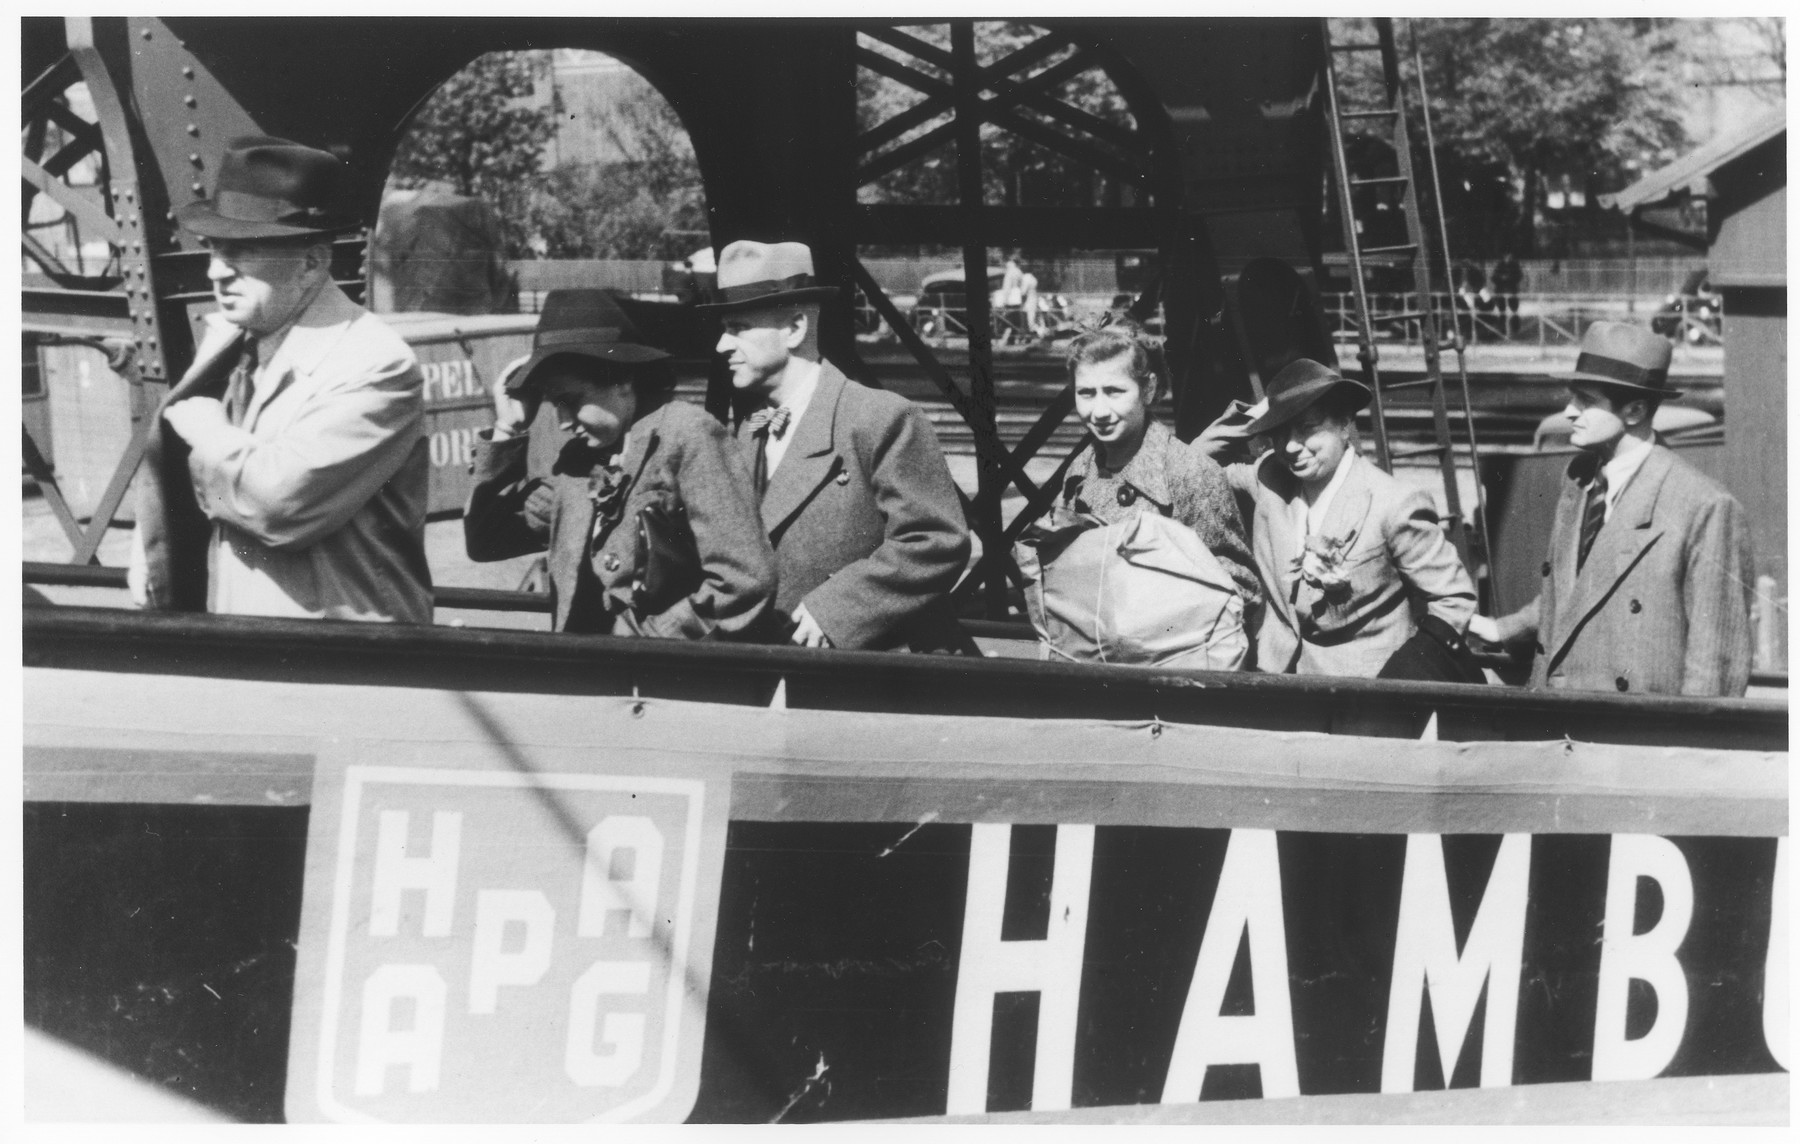 The Hess and Heilbrun families board the MS St. Louis in the port of Hamburg.

Pictured from left to right are Mr. Hess, Vera Hess, Bruno Heilbrun, Ruth Heilbrun and Selly Grete Heilbrun.